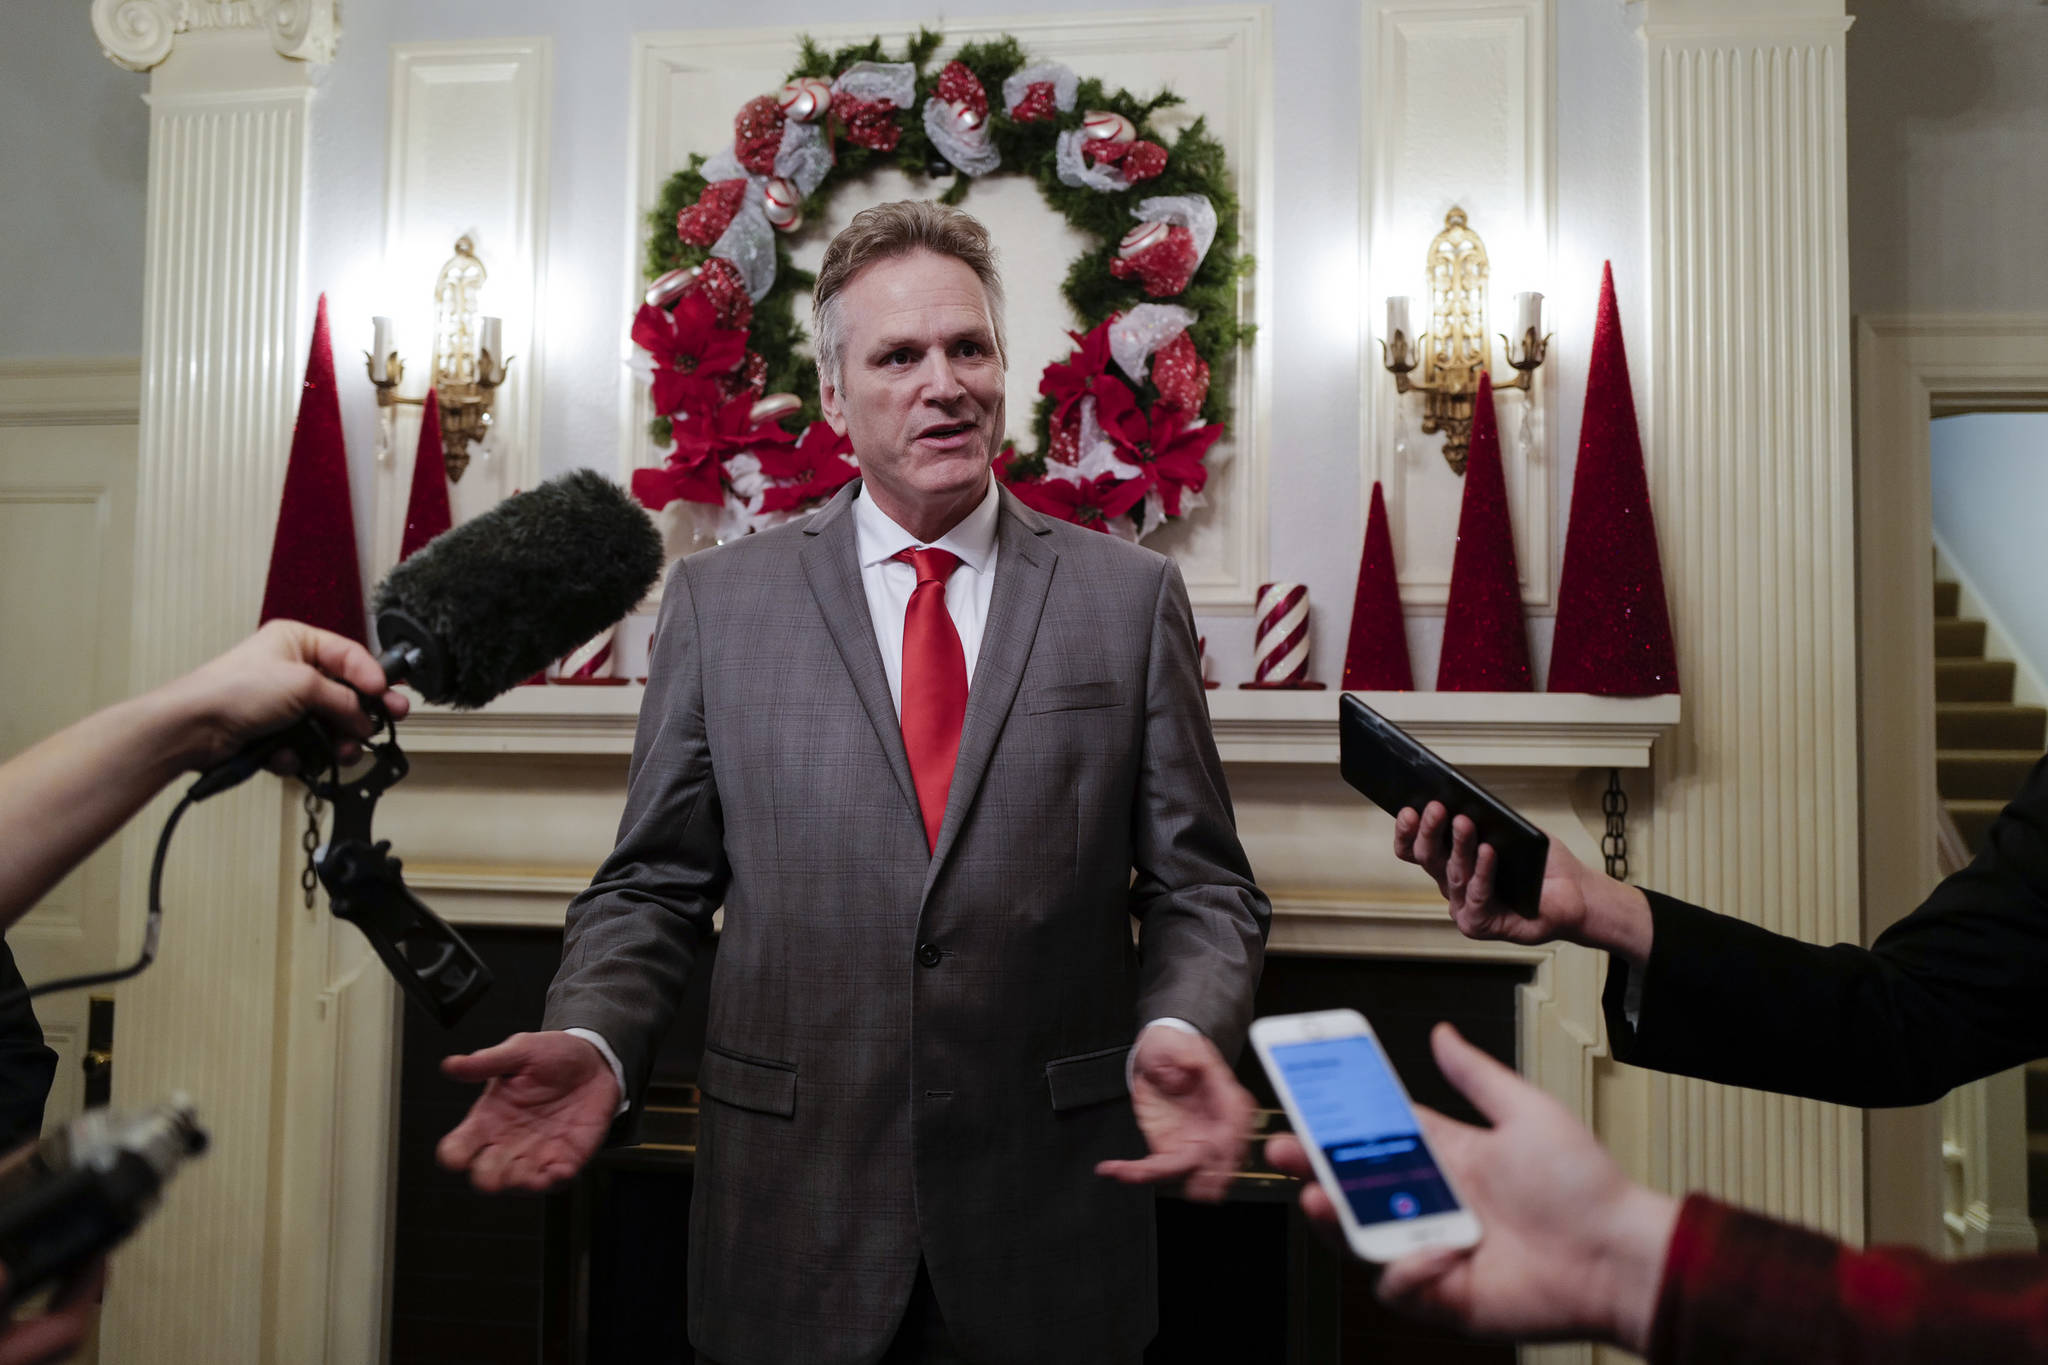 Gov. Mike Dunleavy, R-Alaska, speaks to members of the media before the Governor’s Open House on Tuesday, Dec. 10, 2019. (Michael Penn | Juneau Empire)